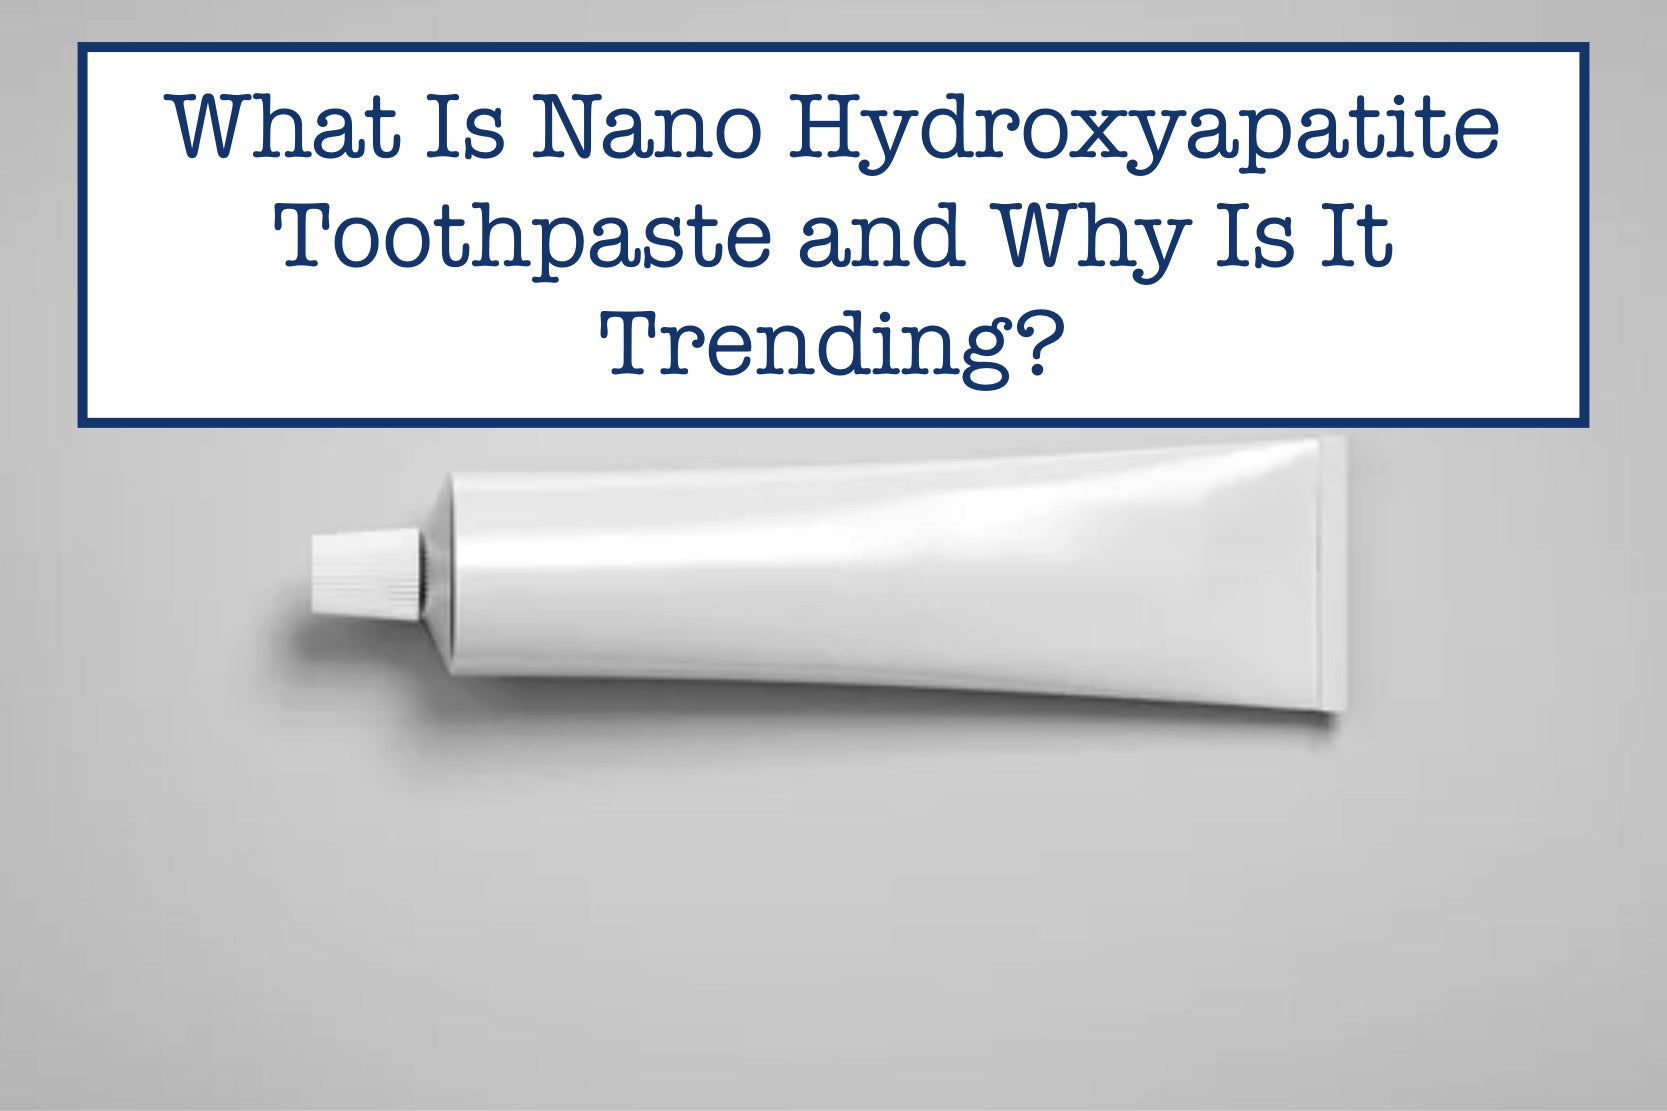 What Is Nano Hydroxyapatite Toothpaste and Why Is It Trending?